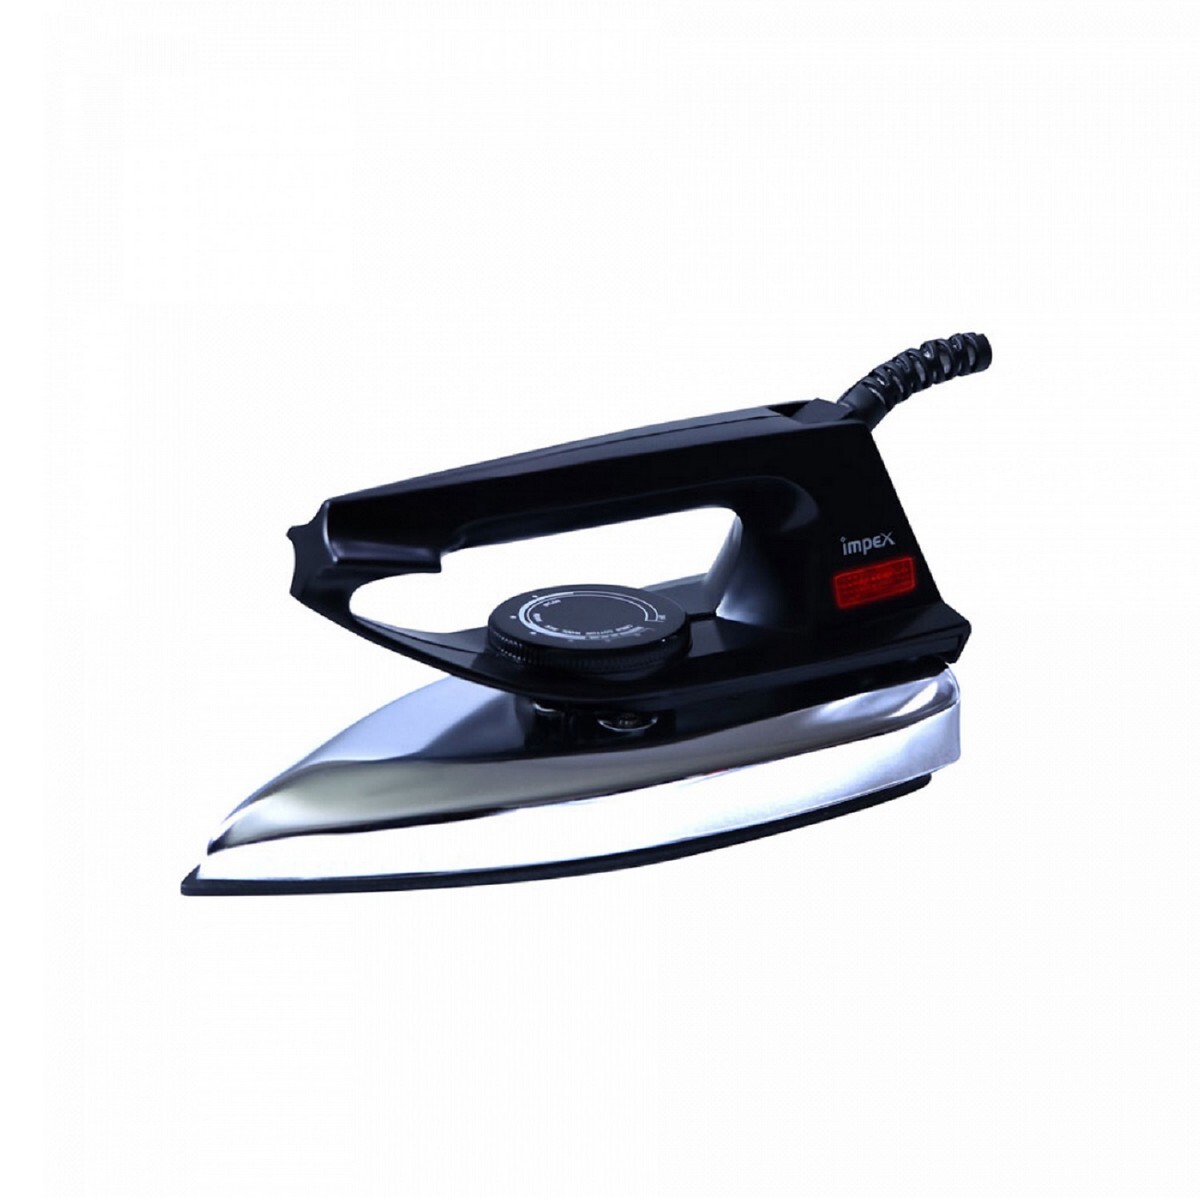 Impex Dry Iron Showy